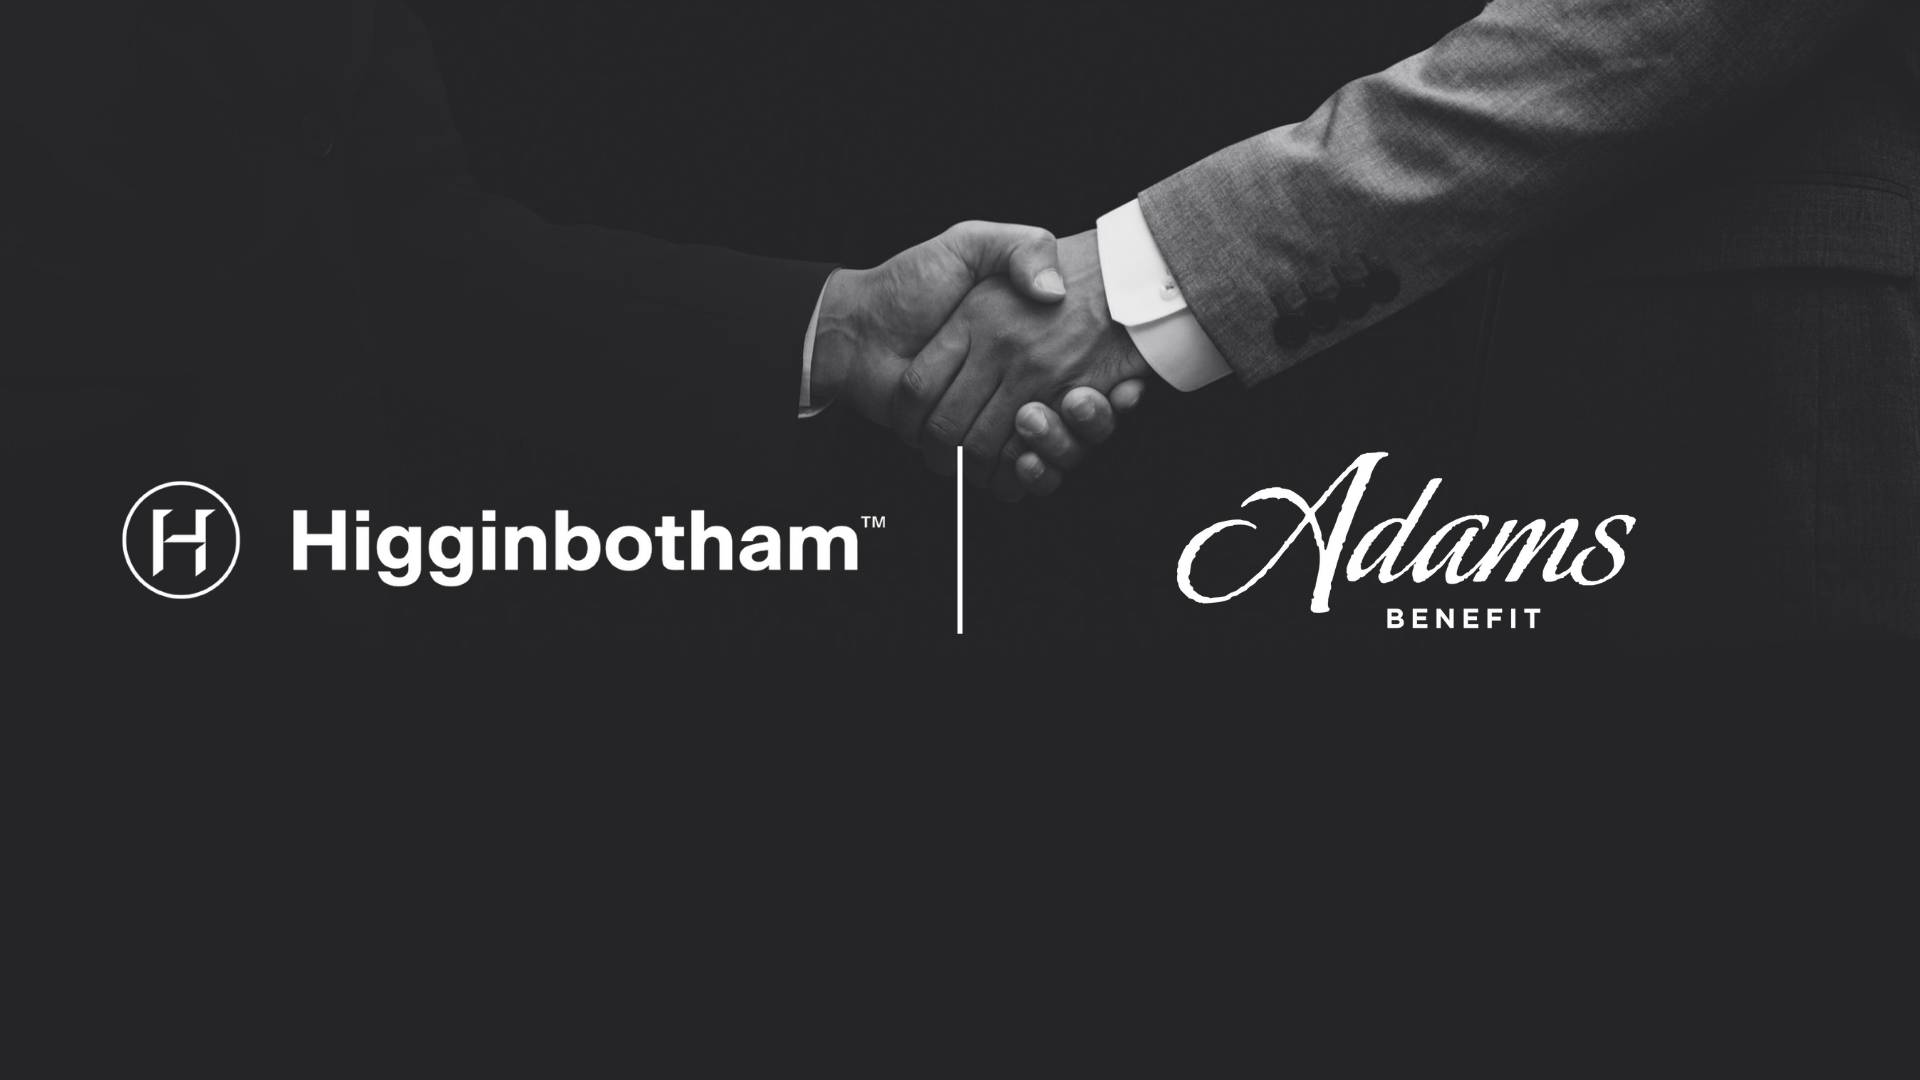 "Higginbotham and Adams Benefit Join Forces: A Partnership Rooted in Shared Values and Community Commitment"